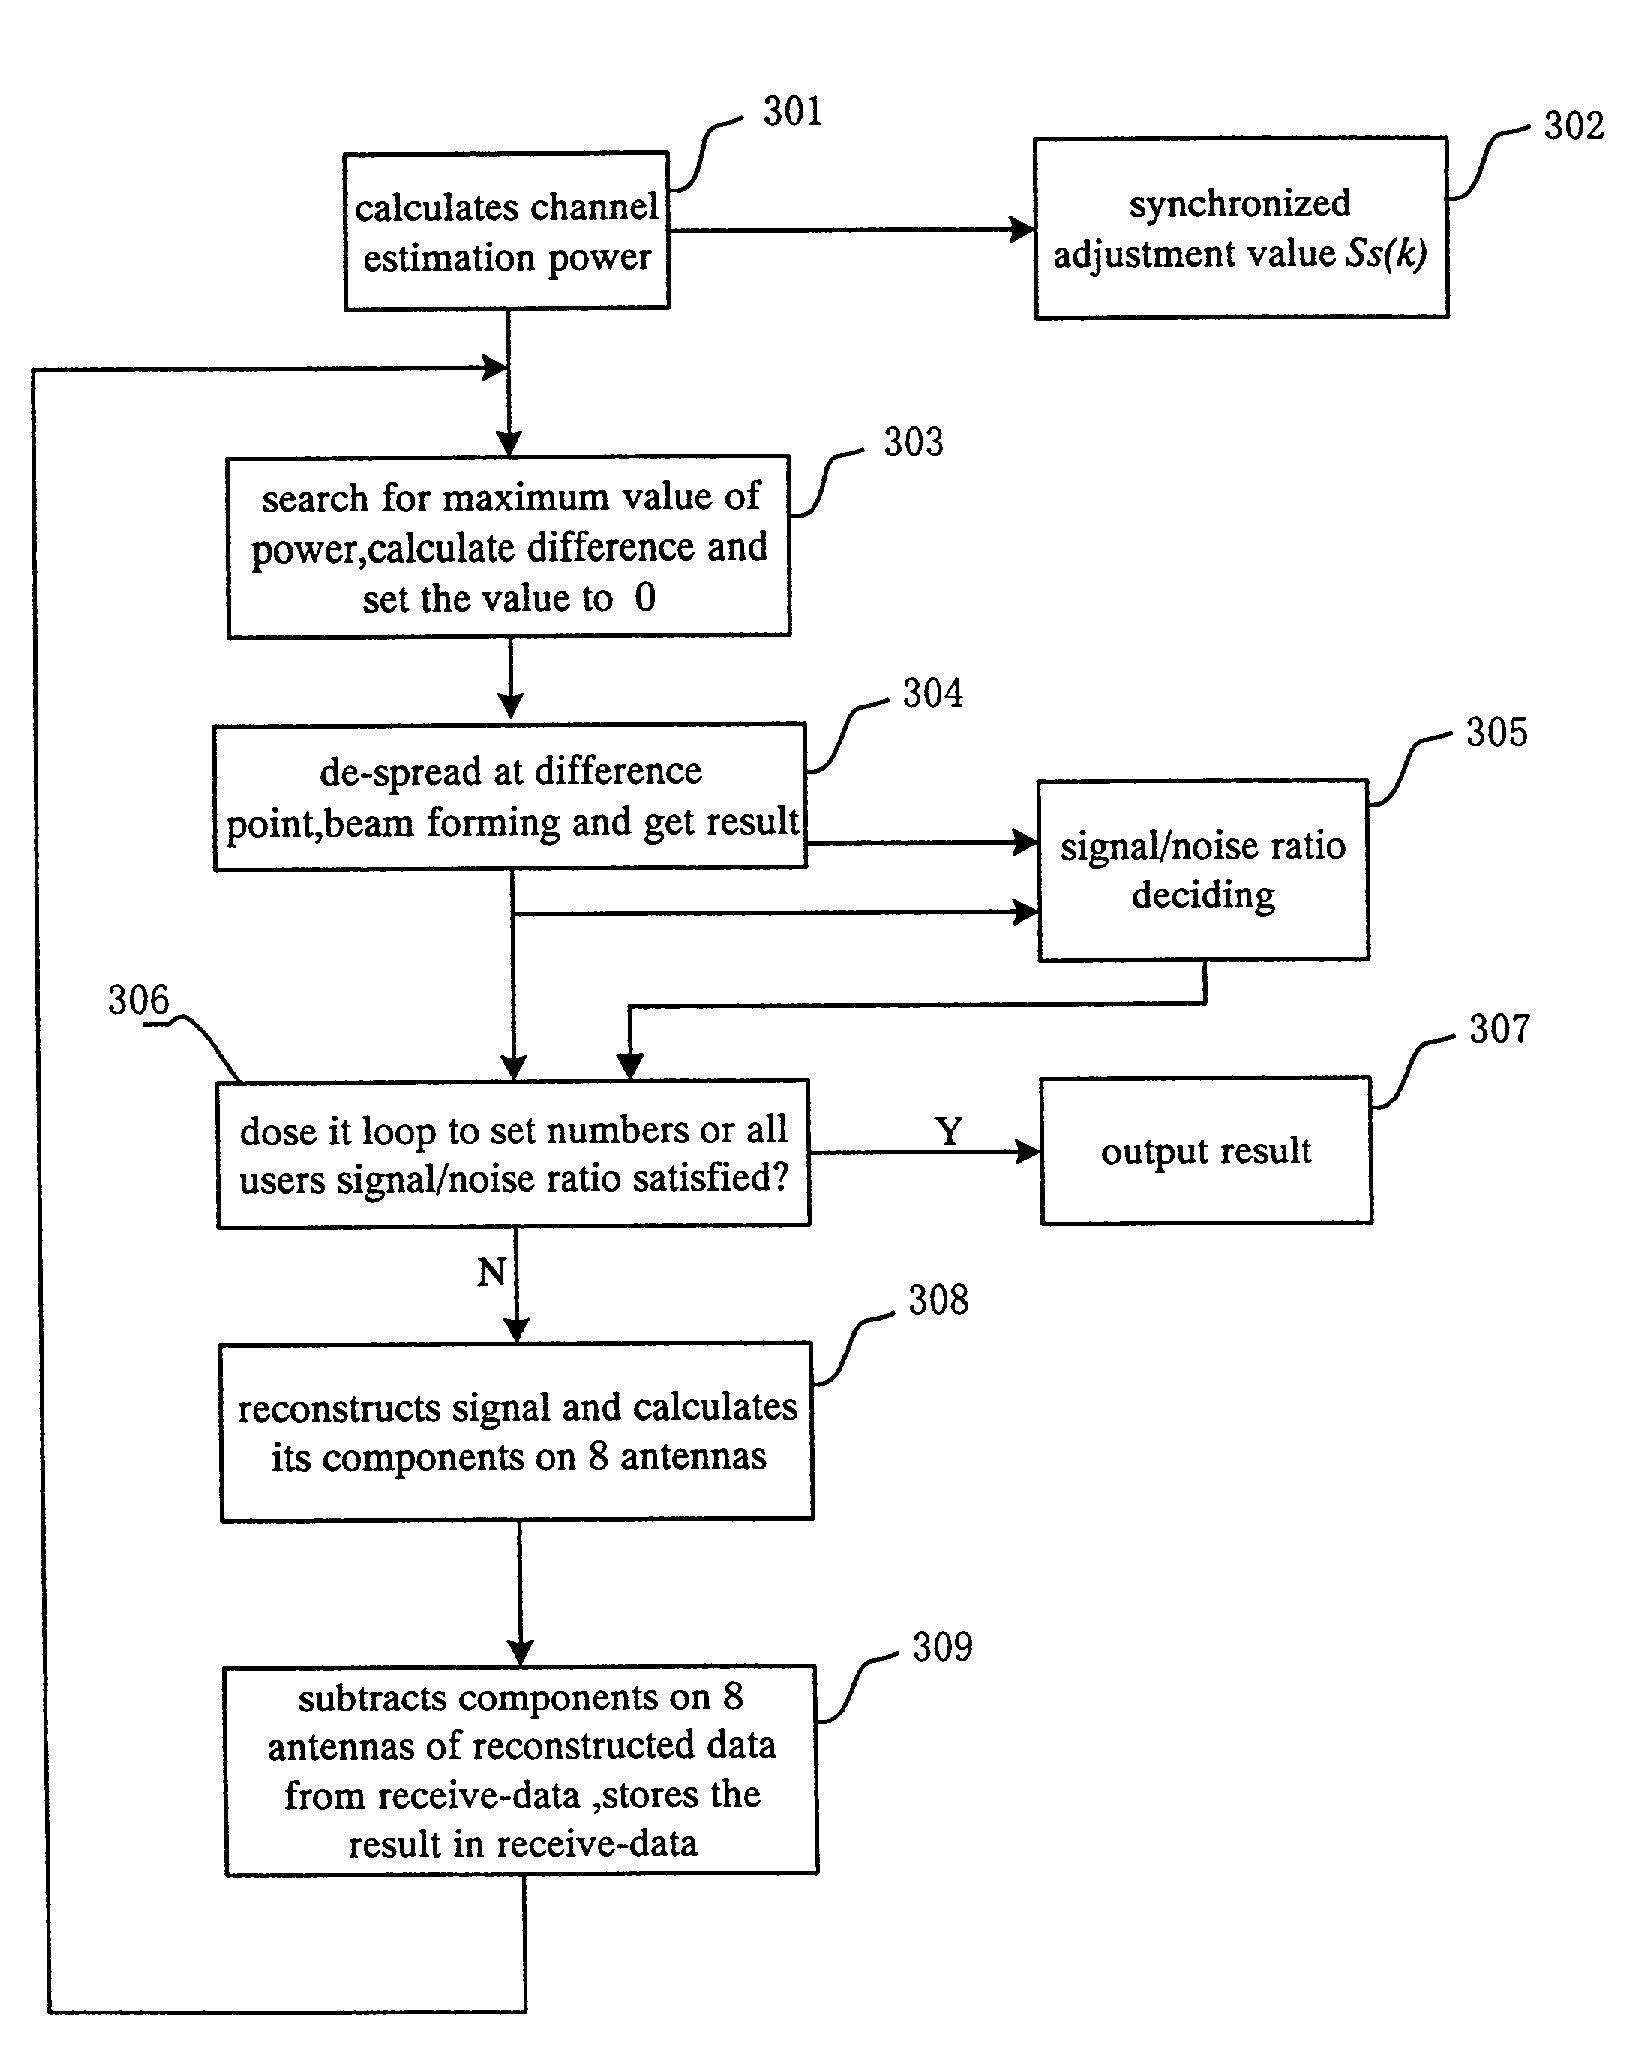 Baseband processing method based on smart antenna and interference cancellation